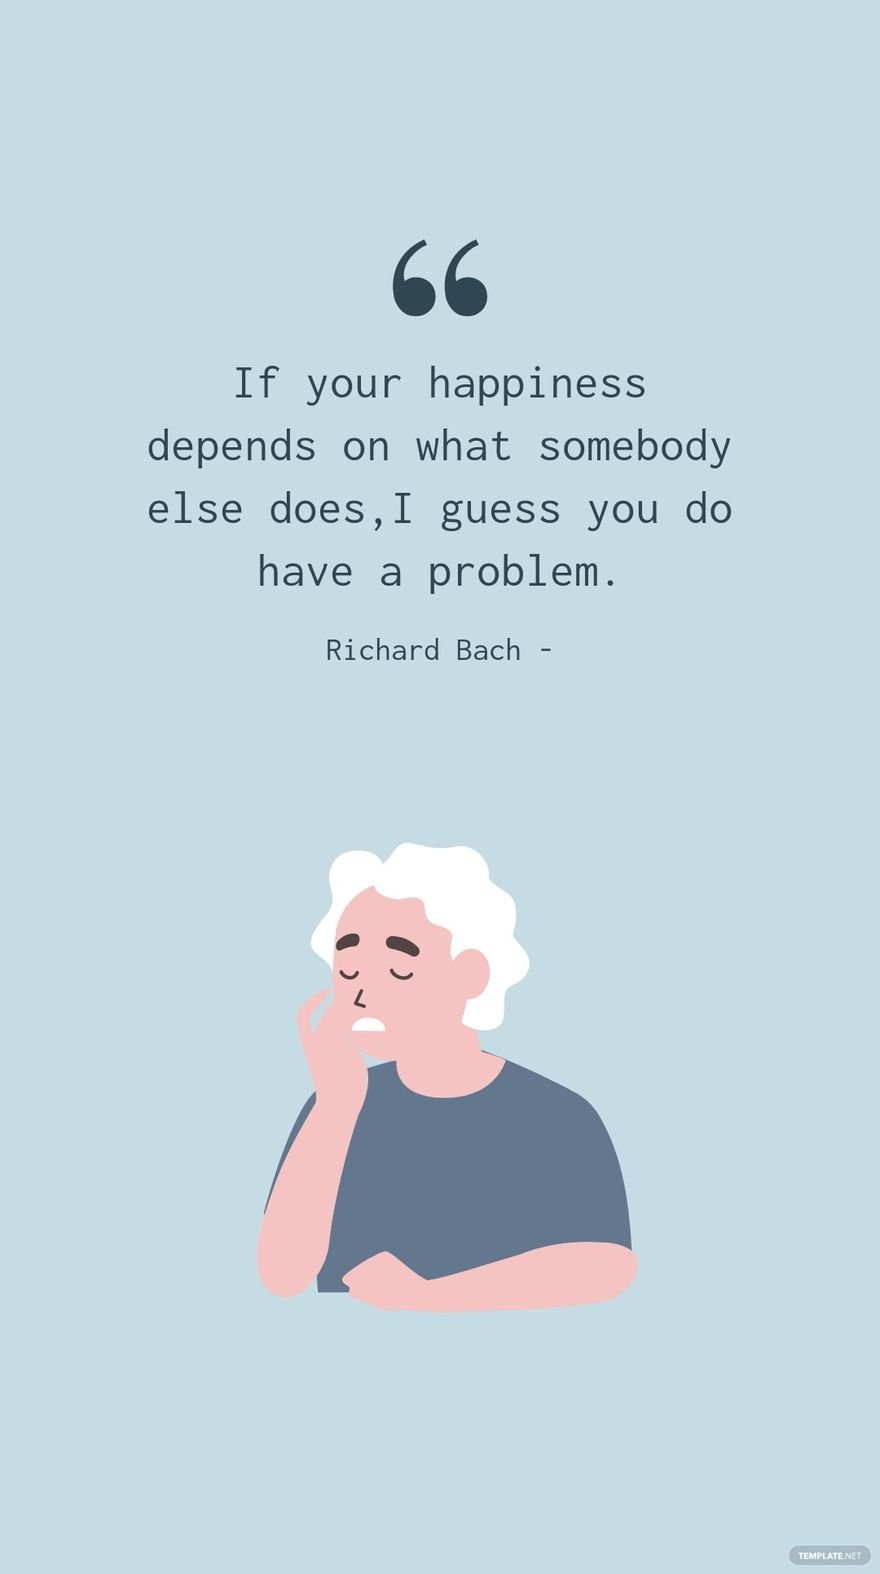 Richard Bach - If your happiness depends on what somebody else does, I guess you do have a problem.